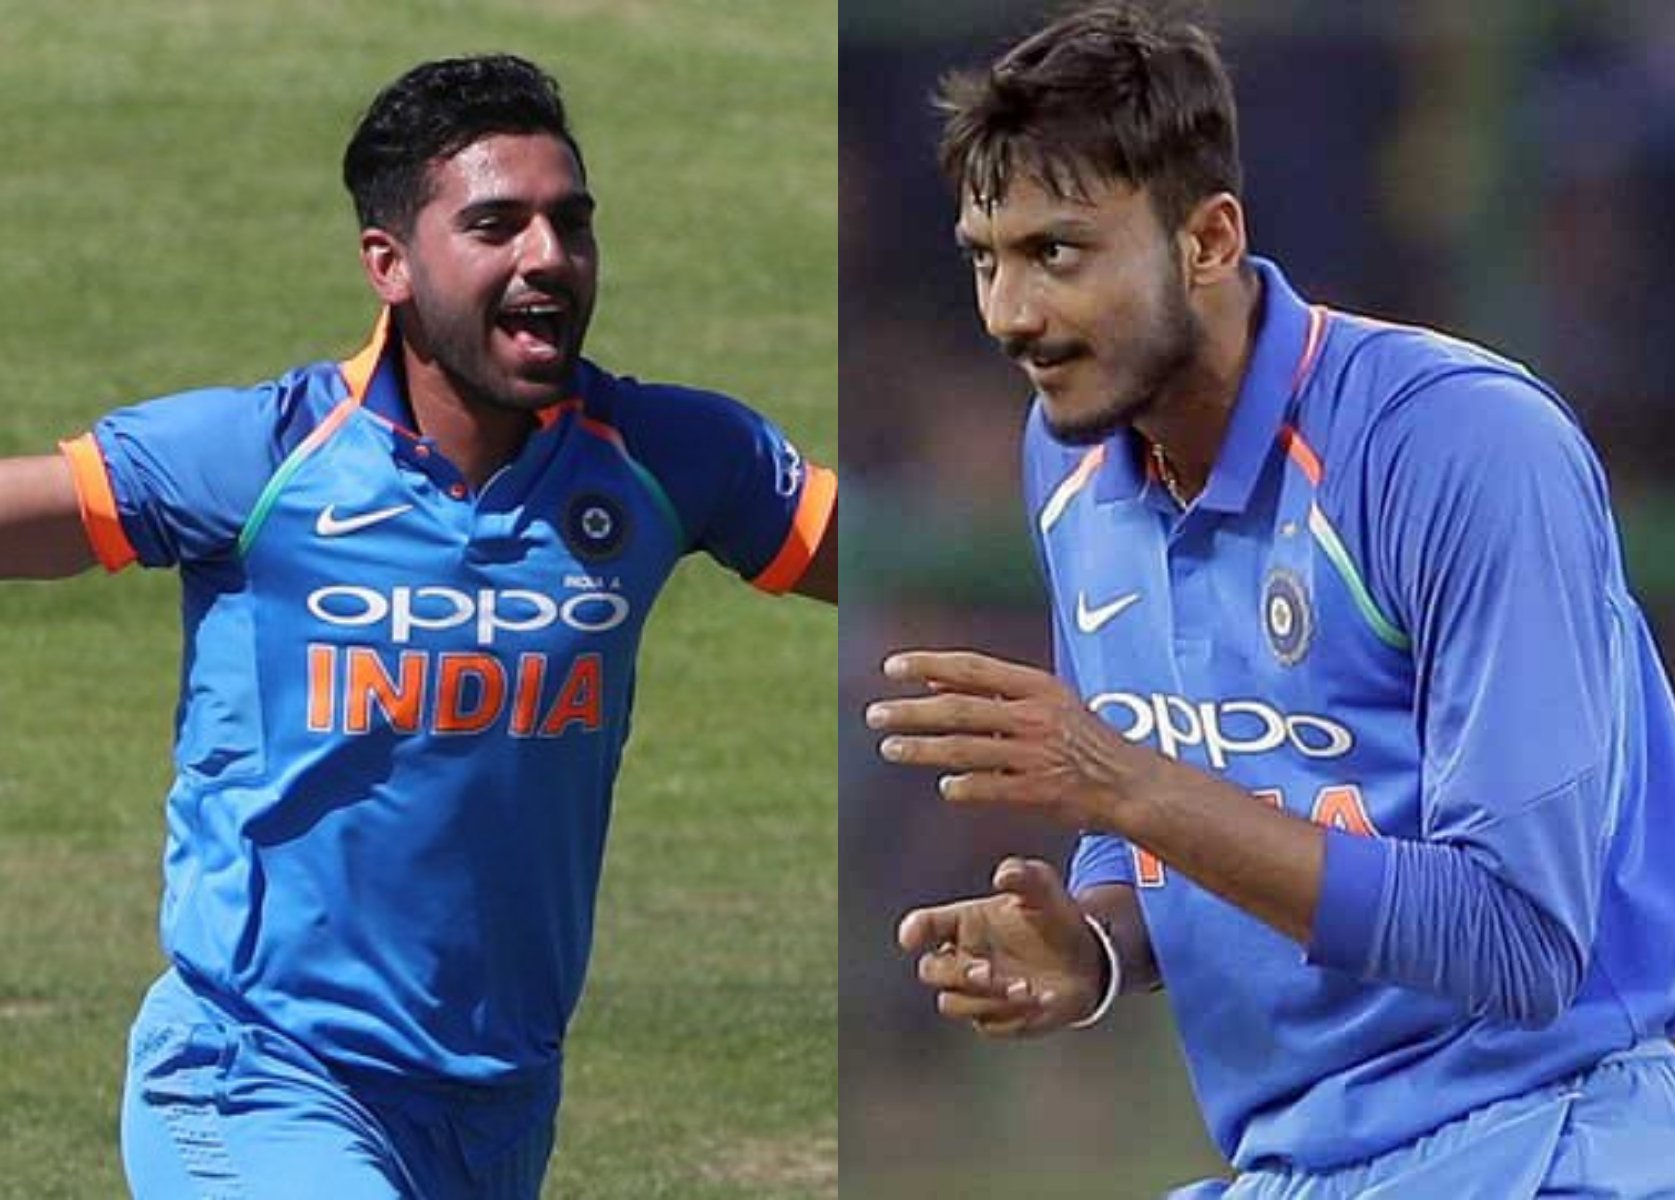 Deepak Chahar topscored with the bat and Akshar Patel dealt early blows to Eng Lions